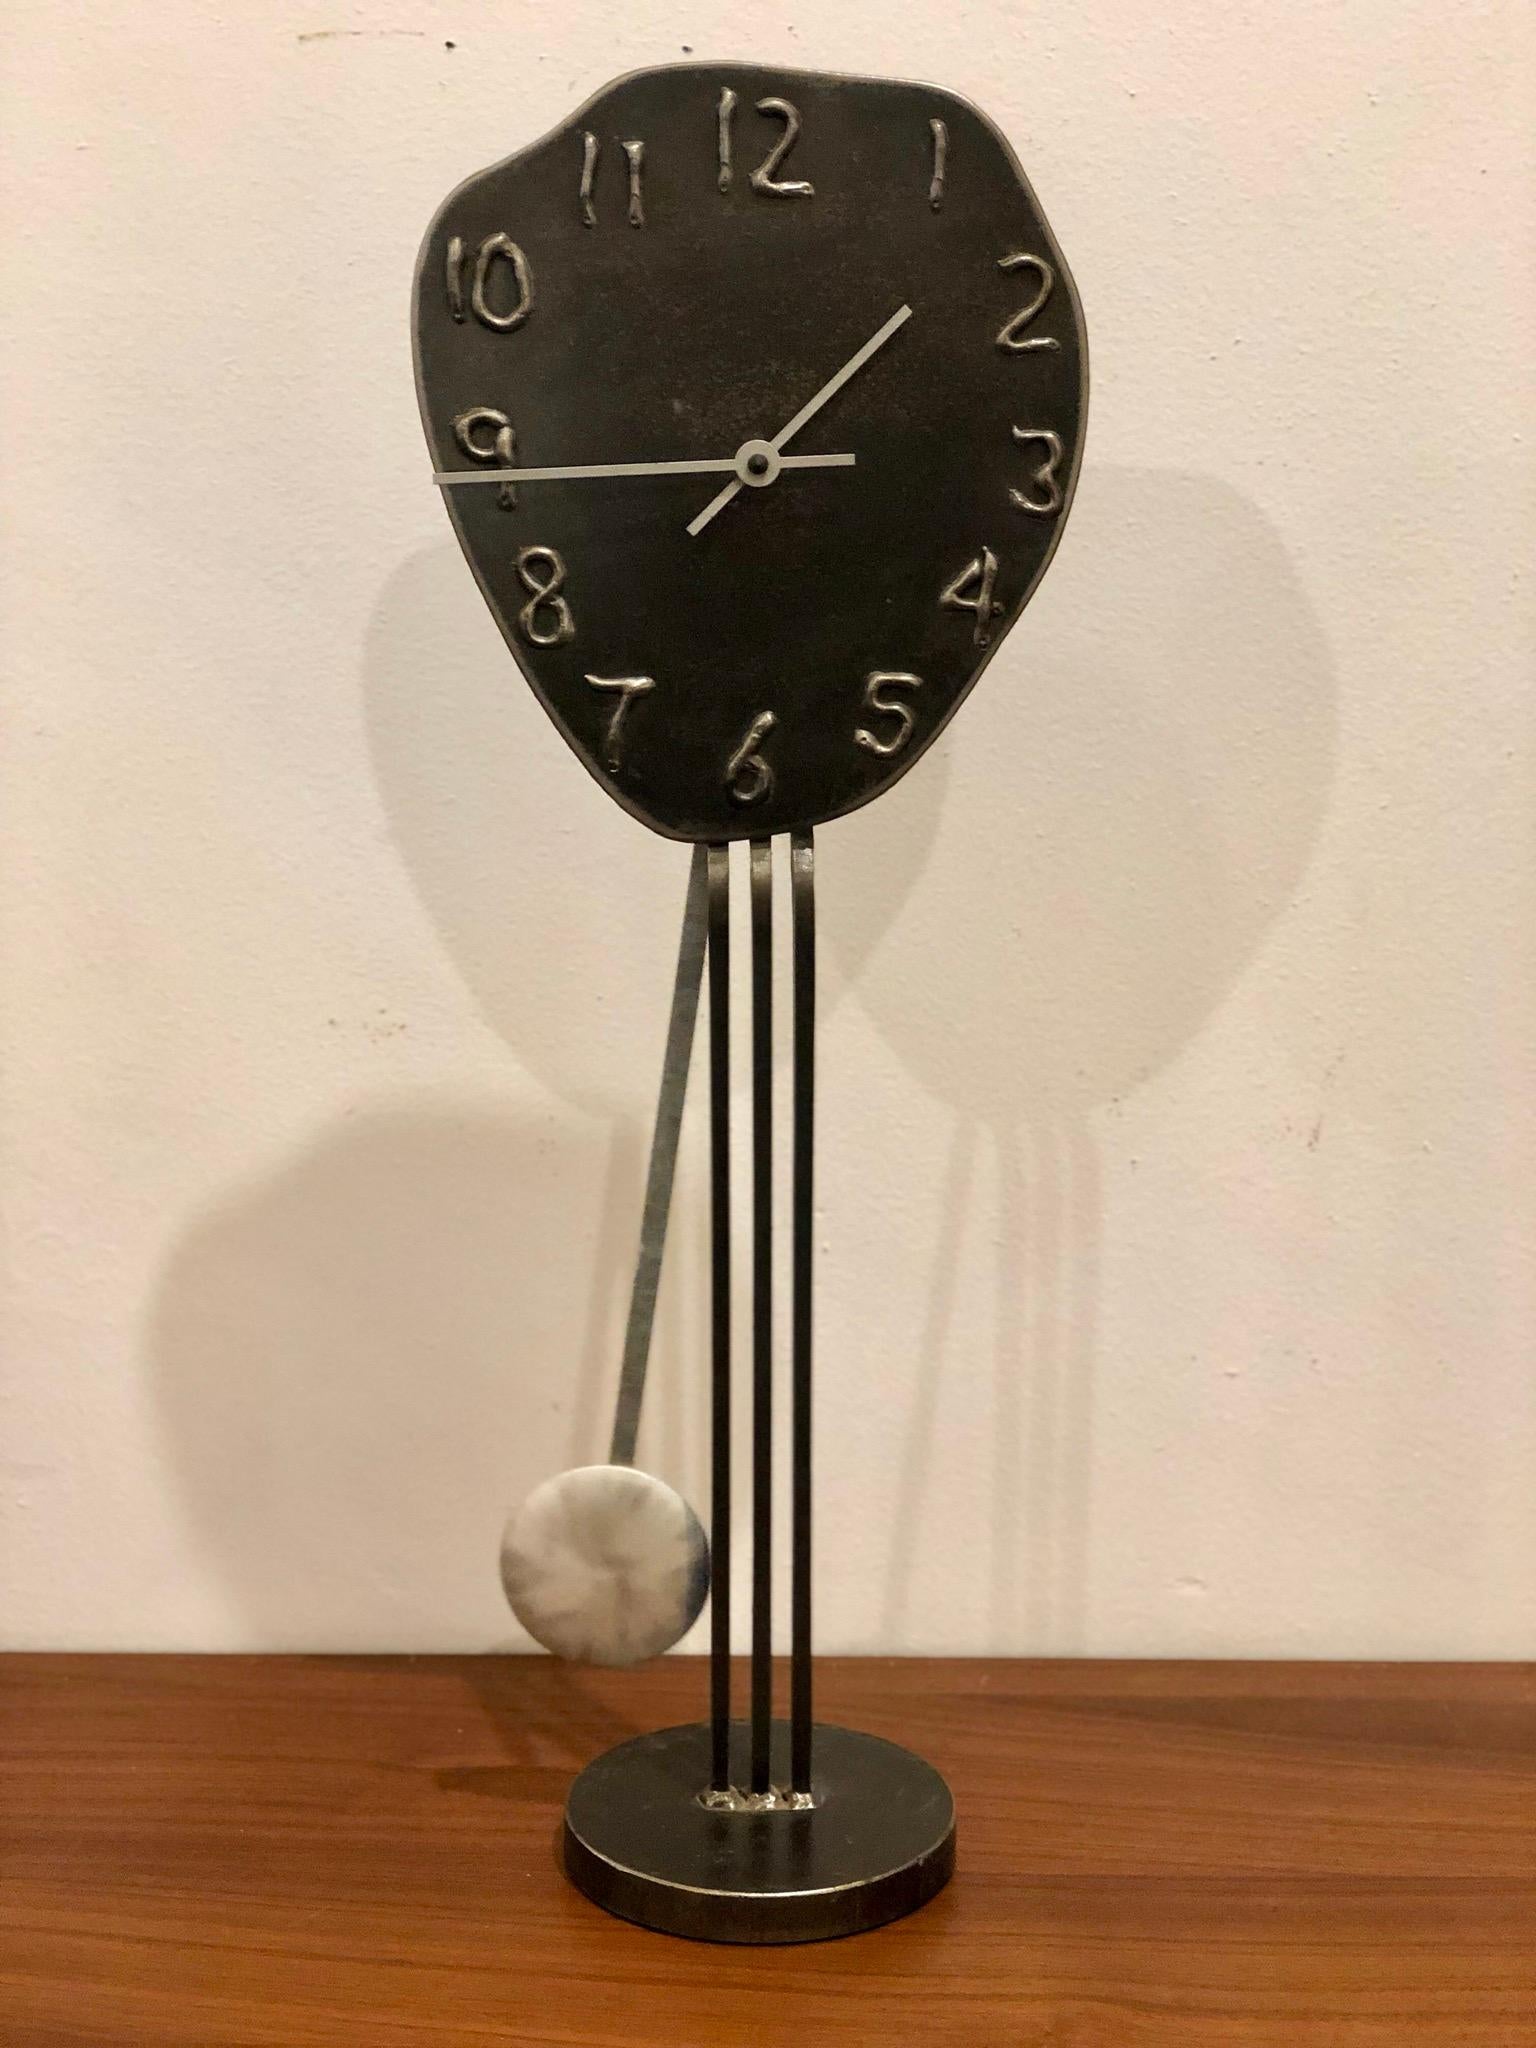 Freeform tall table clock by Artist Jon Surriugarte California design, all handmade in metal and iron signed in the back in the style of Salvador Dali, circa 1991 battery operated in working condition.